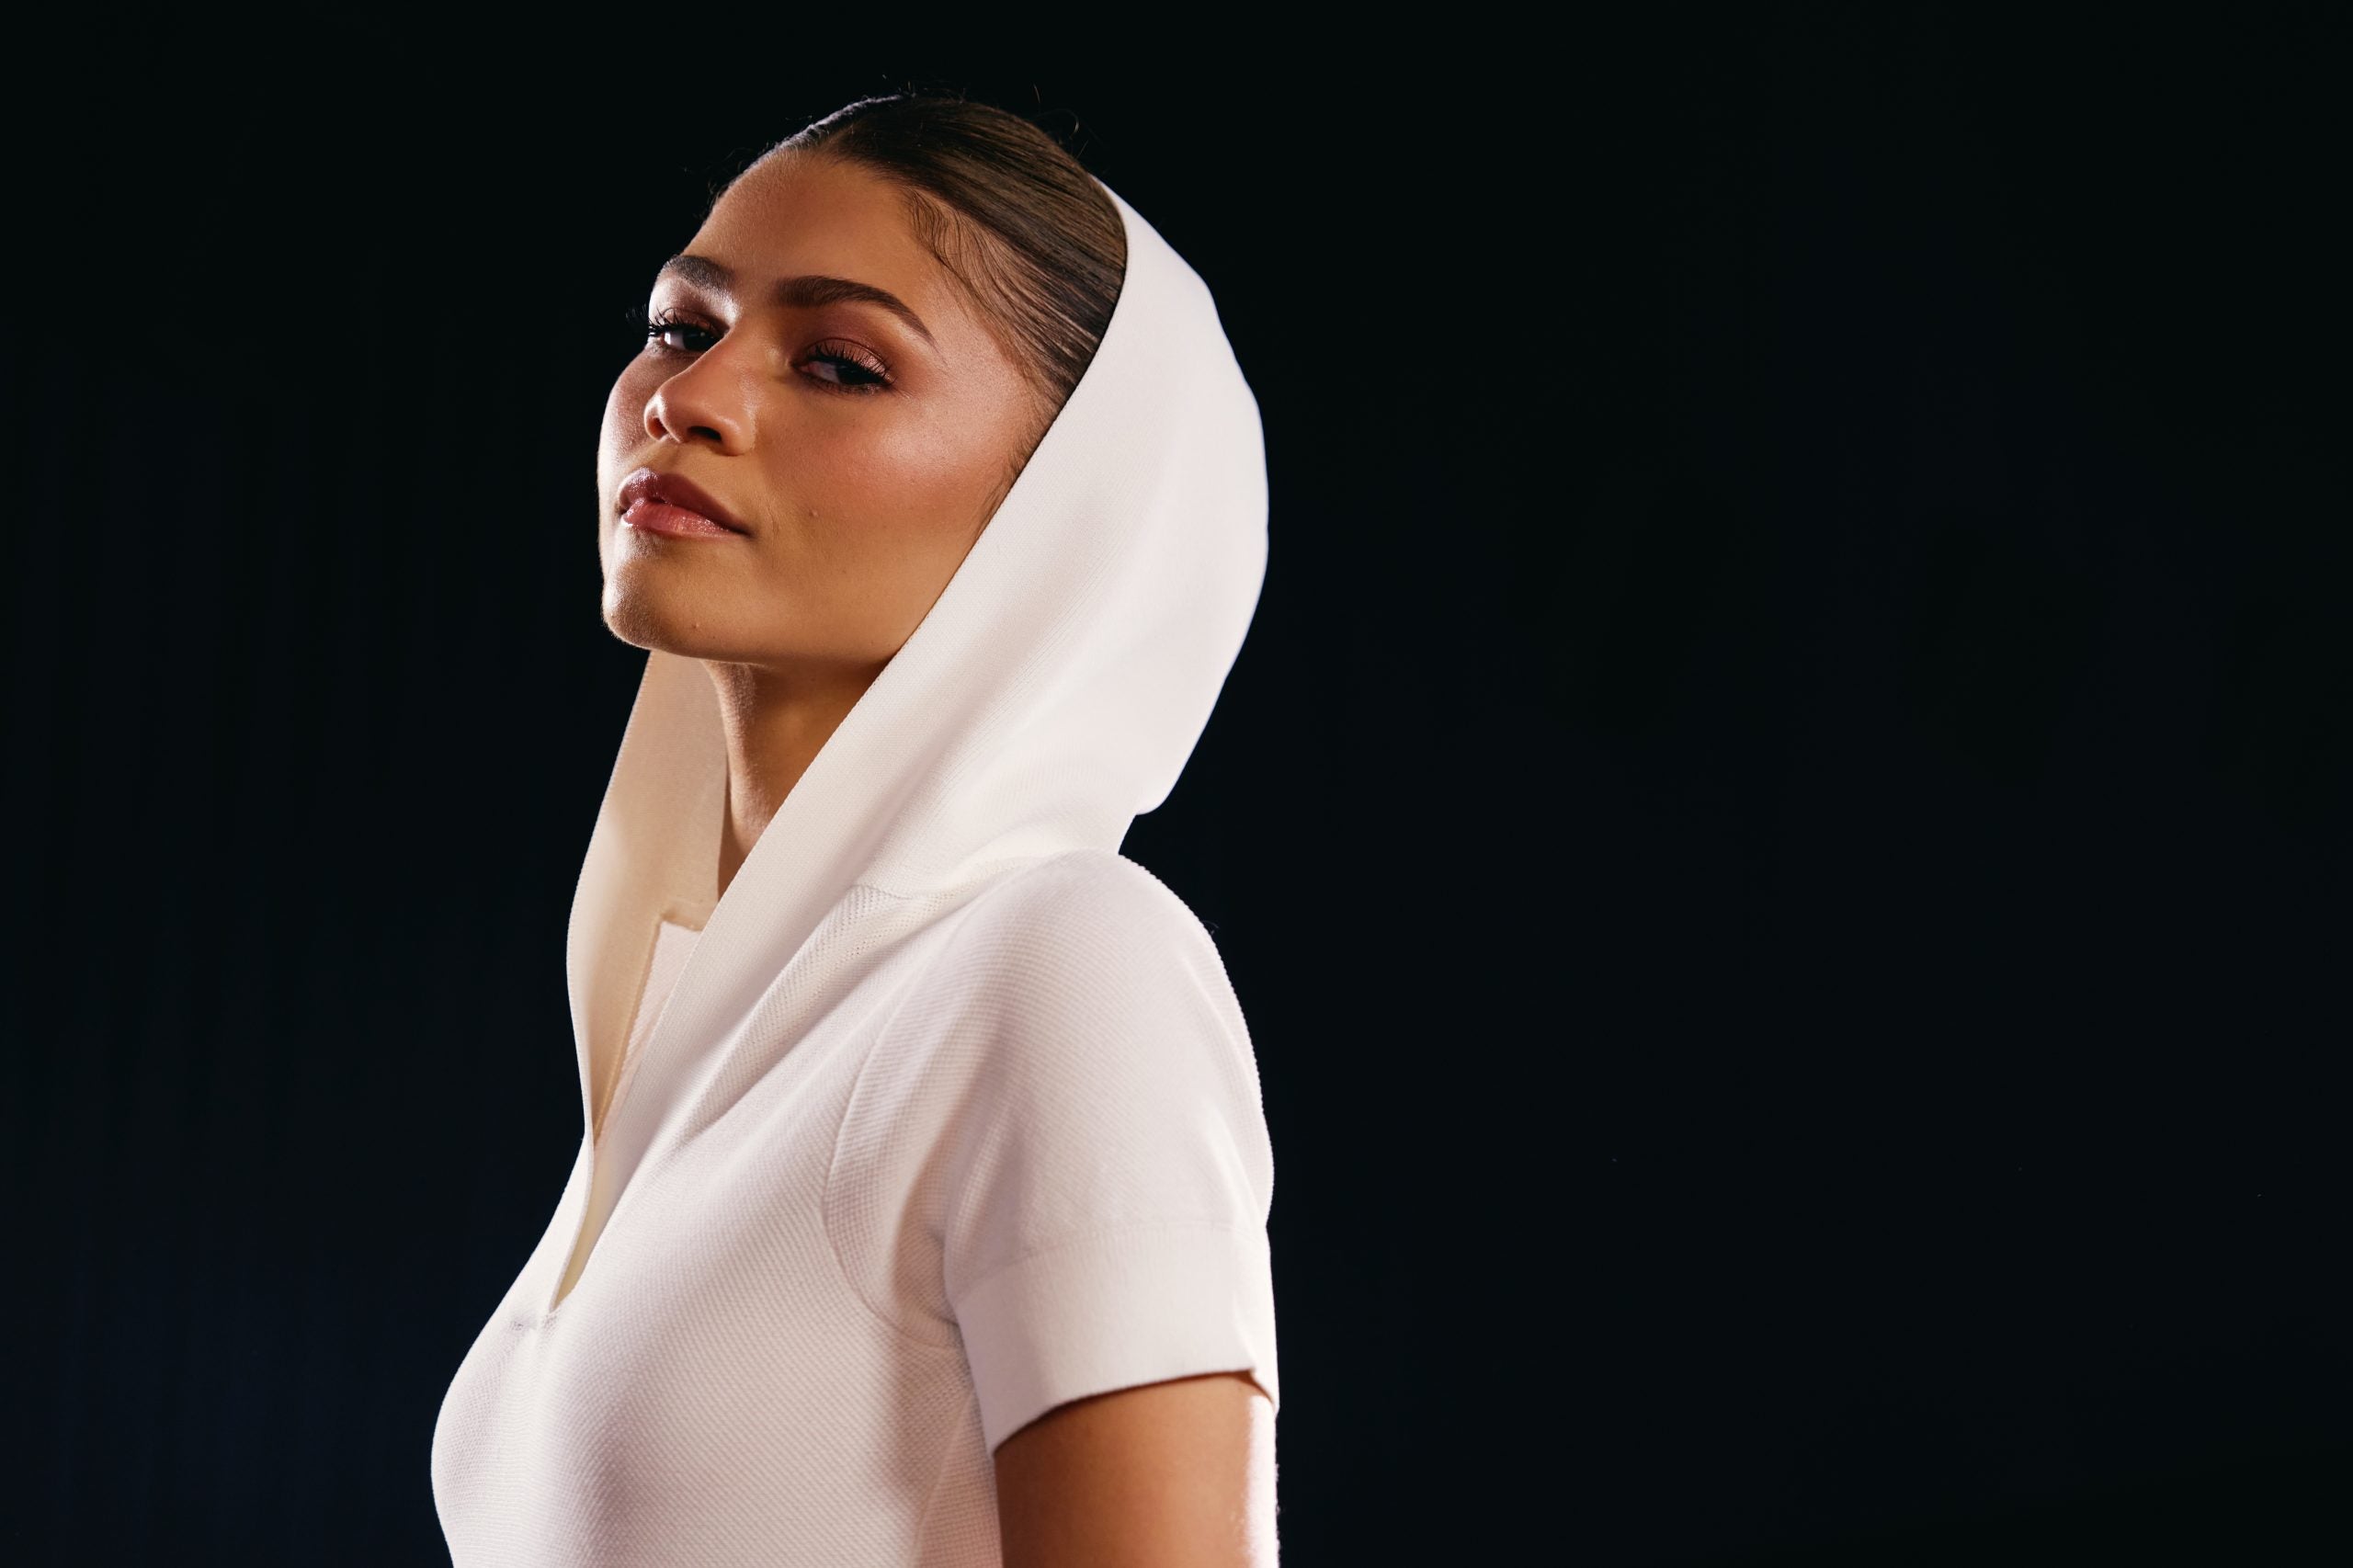 WATCH: Zendaya Reflects on What Factor Race Plays in “Challengers” Off-Court Romance